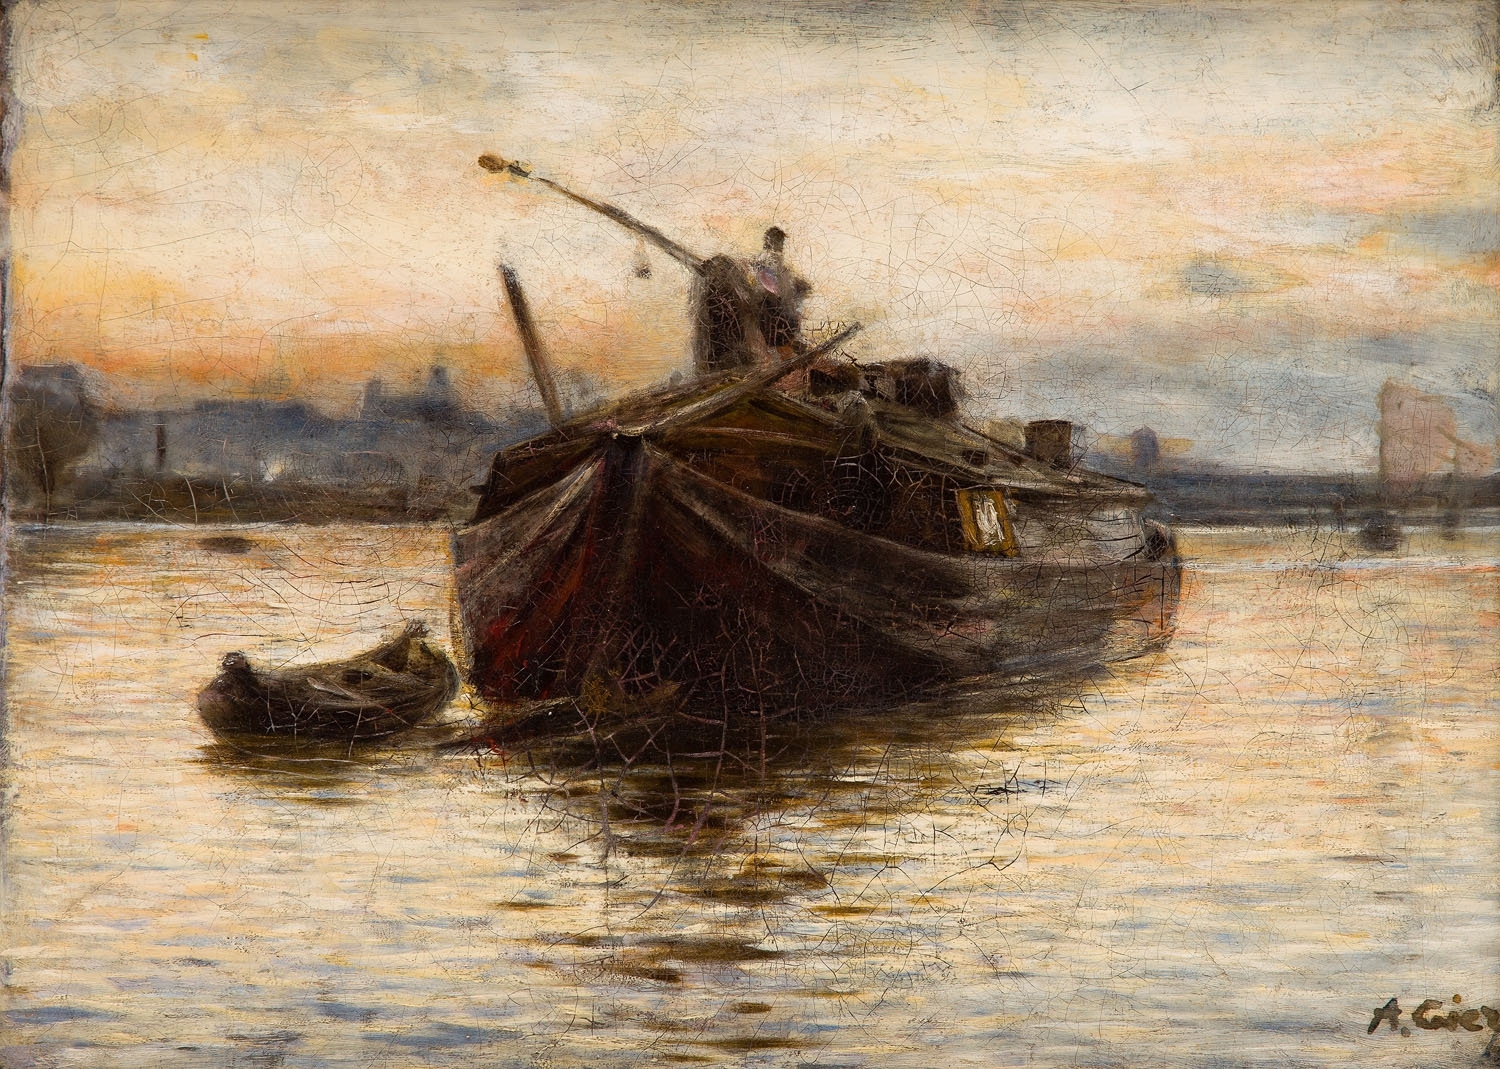 Artwork by Aleksander Gierymski, "From the Vistula Bank" ("A Barge on the river"), Made of oil/canvas